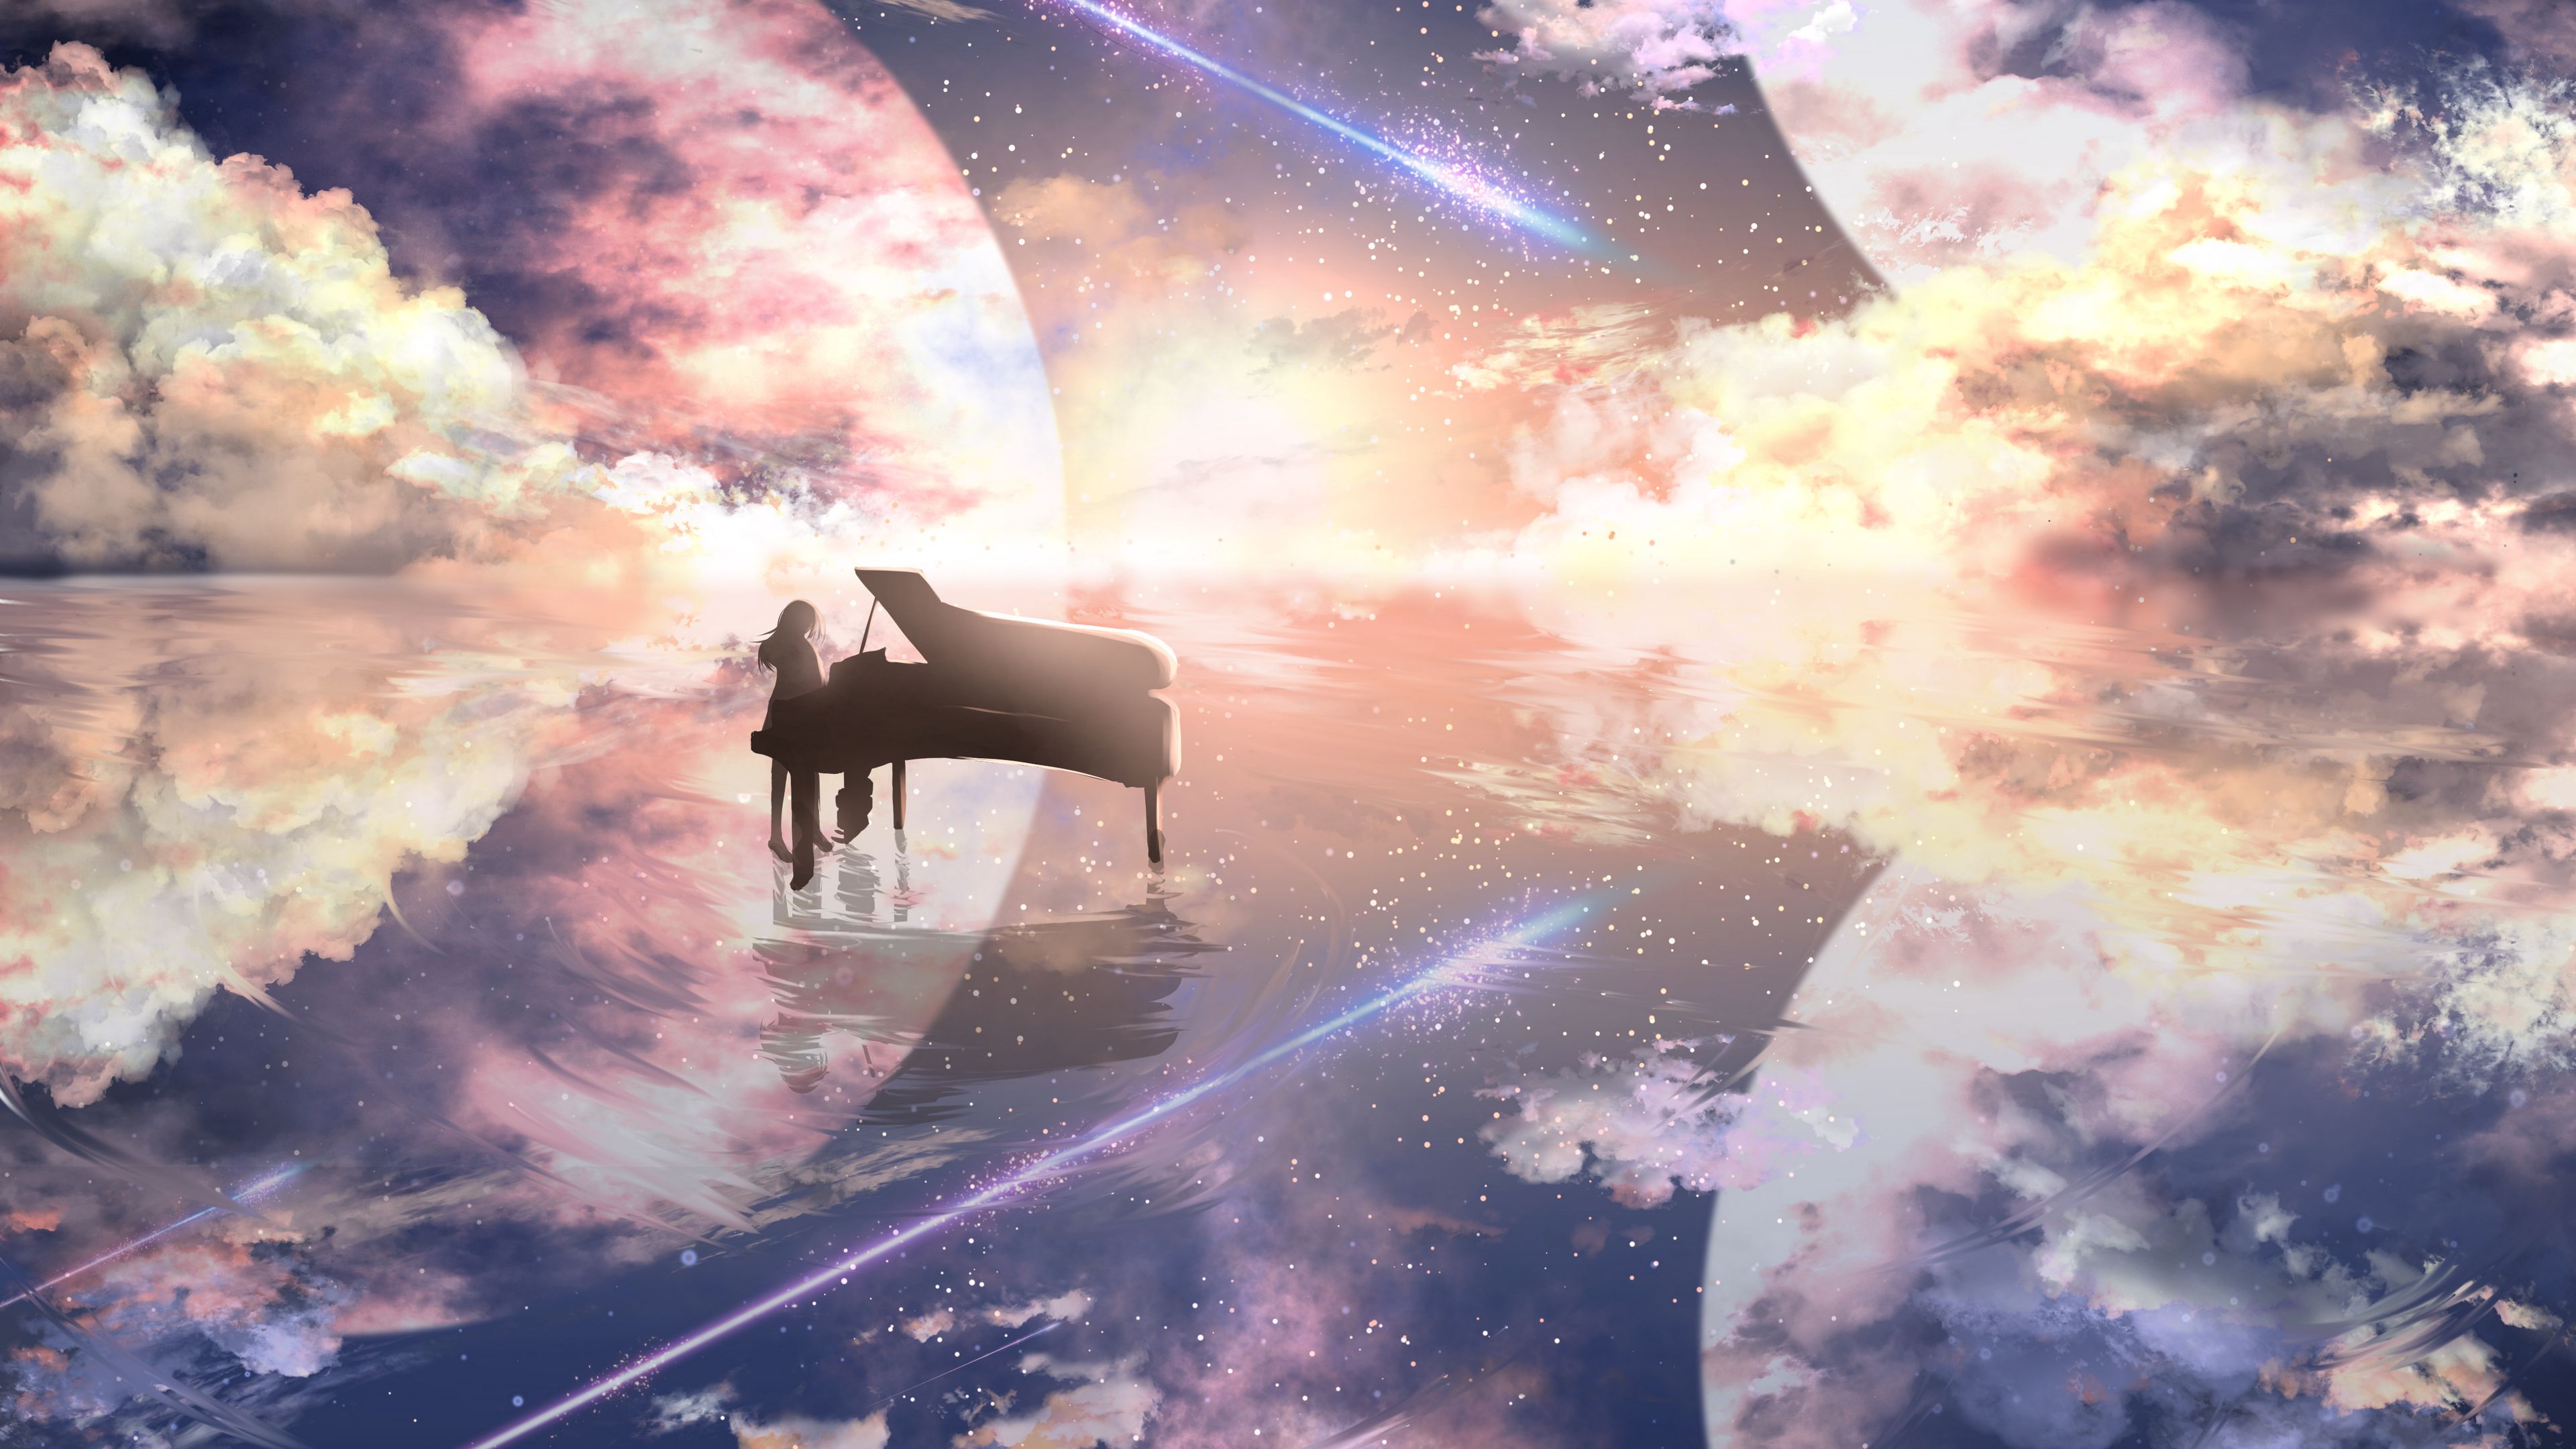 Download wallpaper 3840x2160 piano, silhouette, space, illusion, anime 4k uhd 16:9 HD background